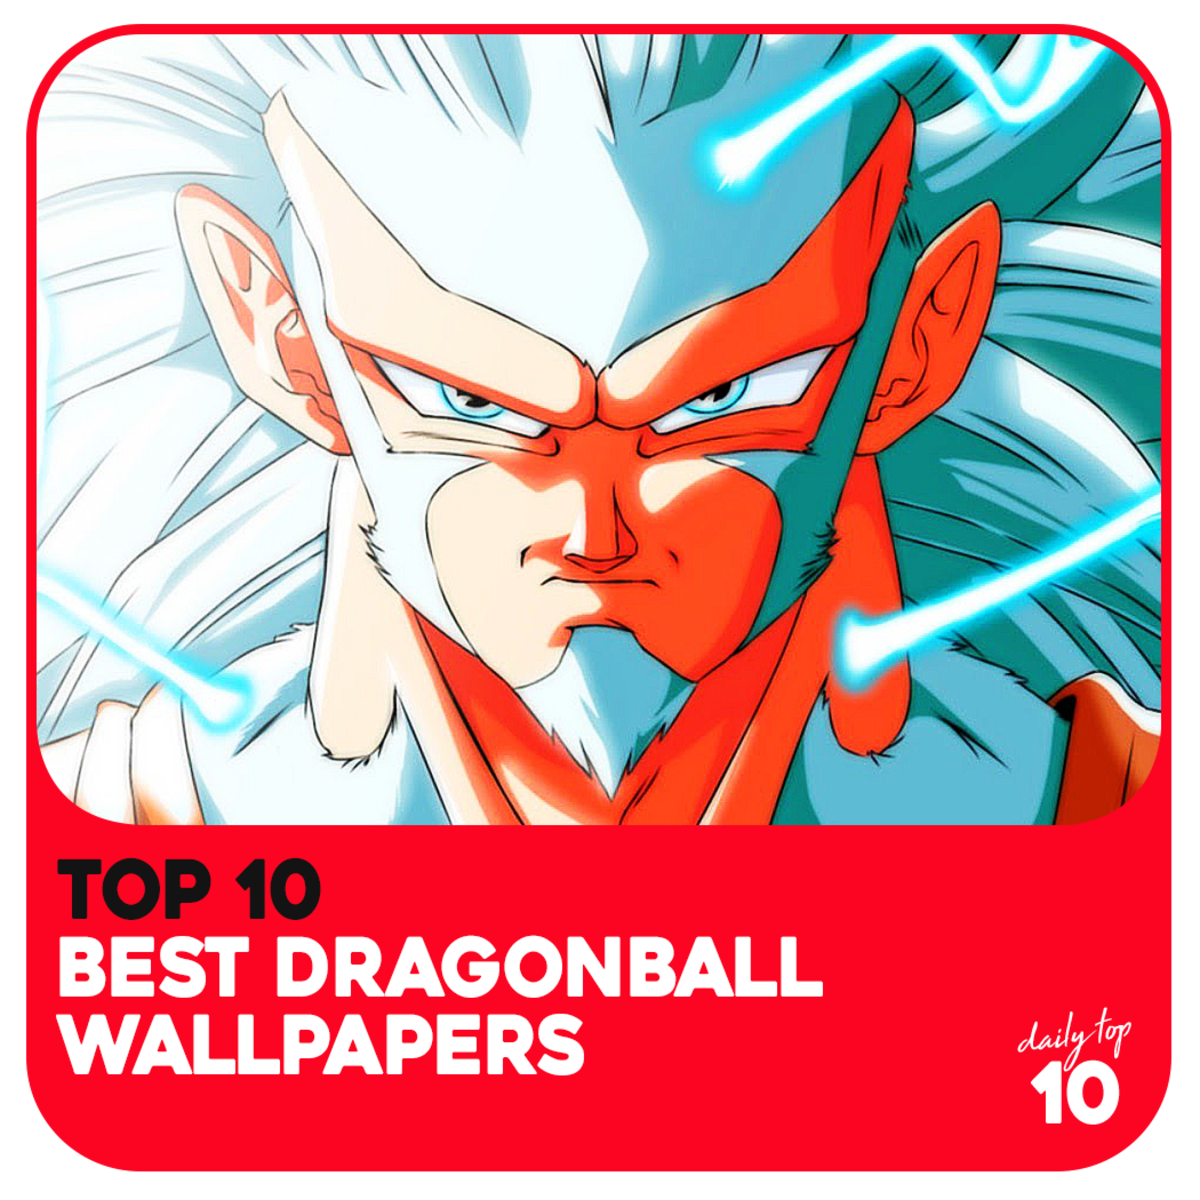 Top 10 Best Dragonball Wallpapers Hd (Updated With Dragonball Super Wallpapers)